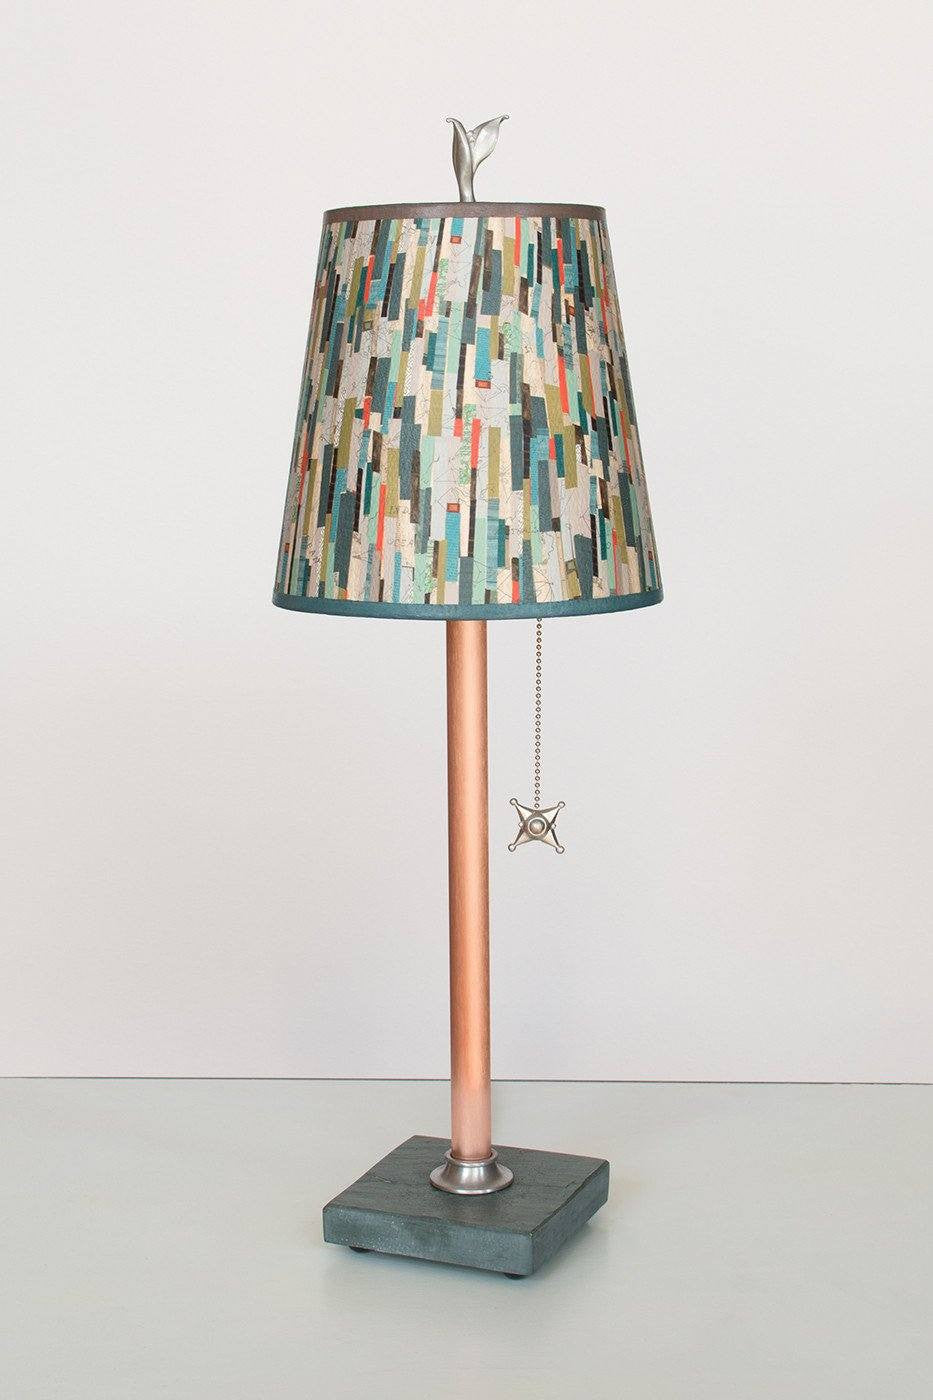 Janna Ugone &amp; Co Table Lamps Copper Table Lamp with Small Drum Shade in Papers